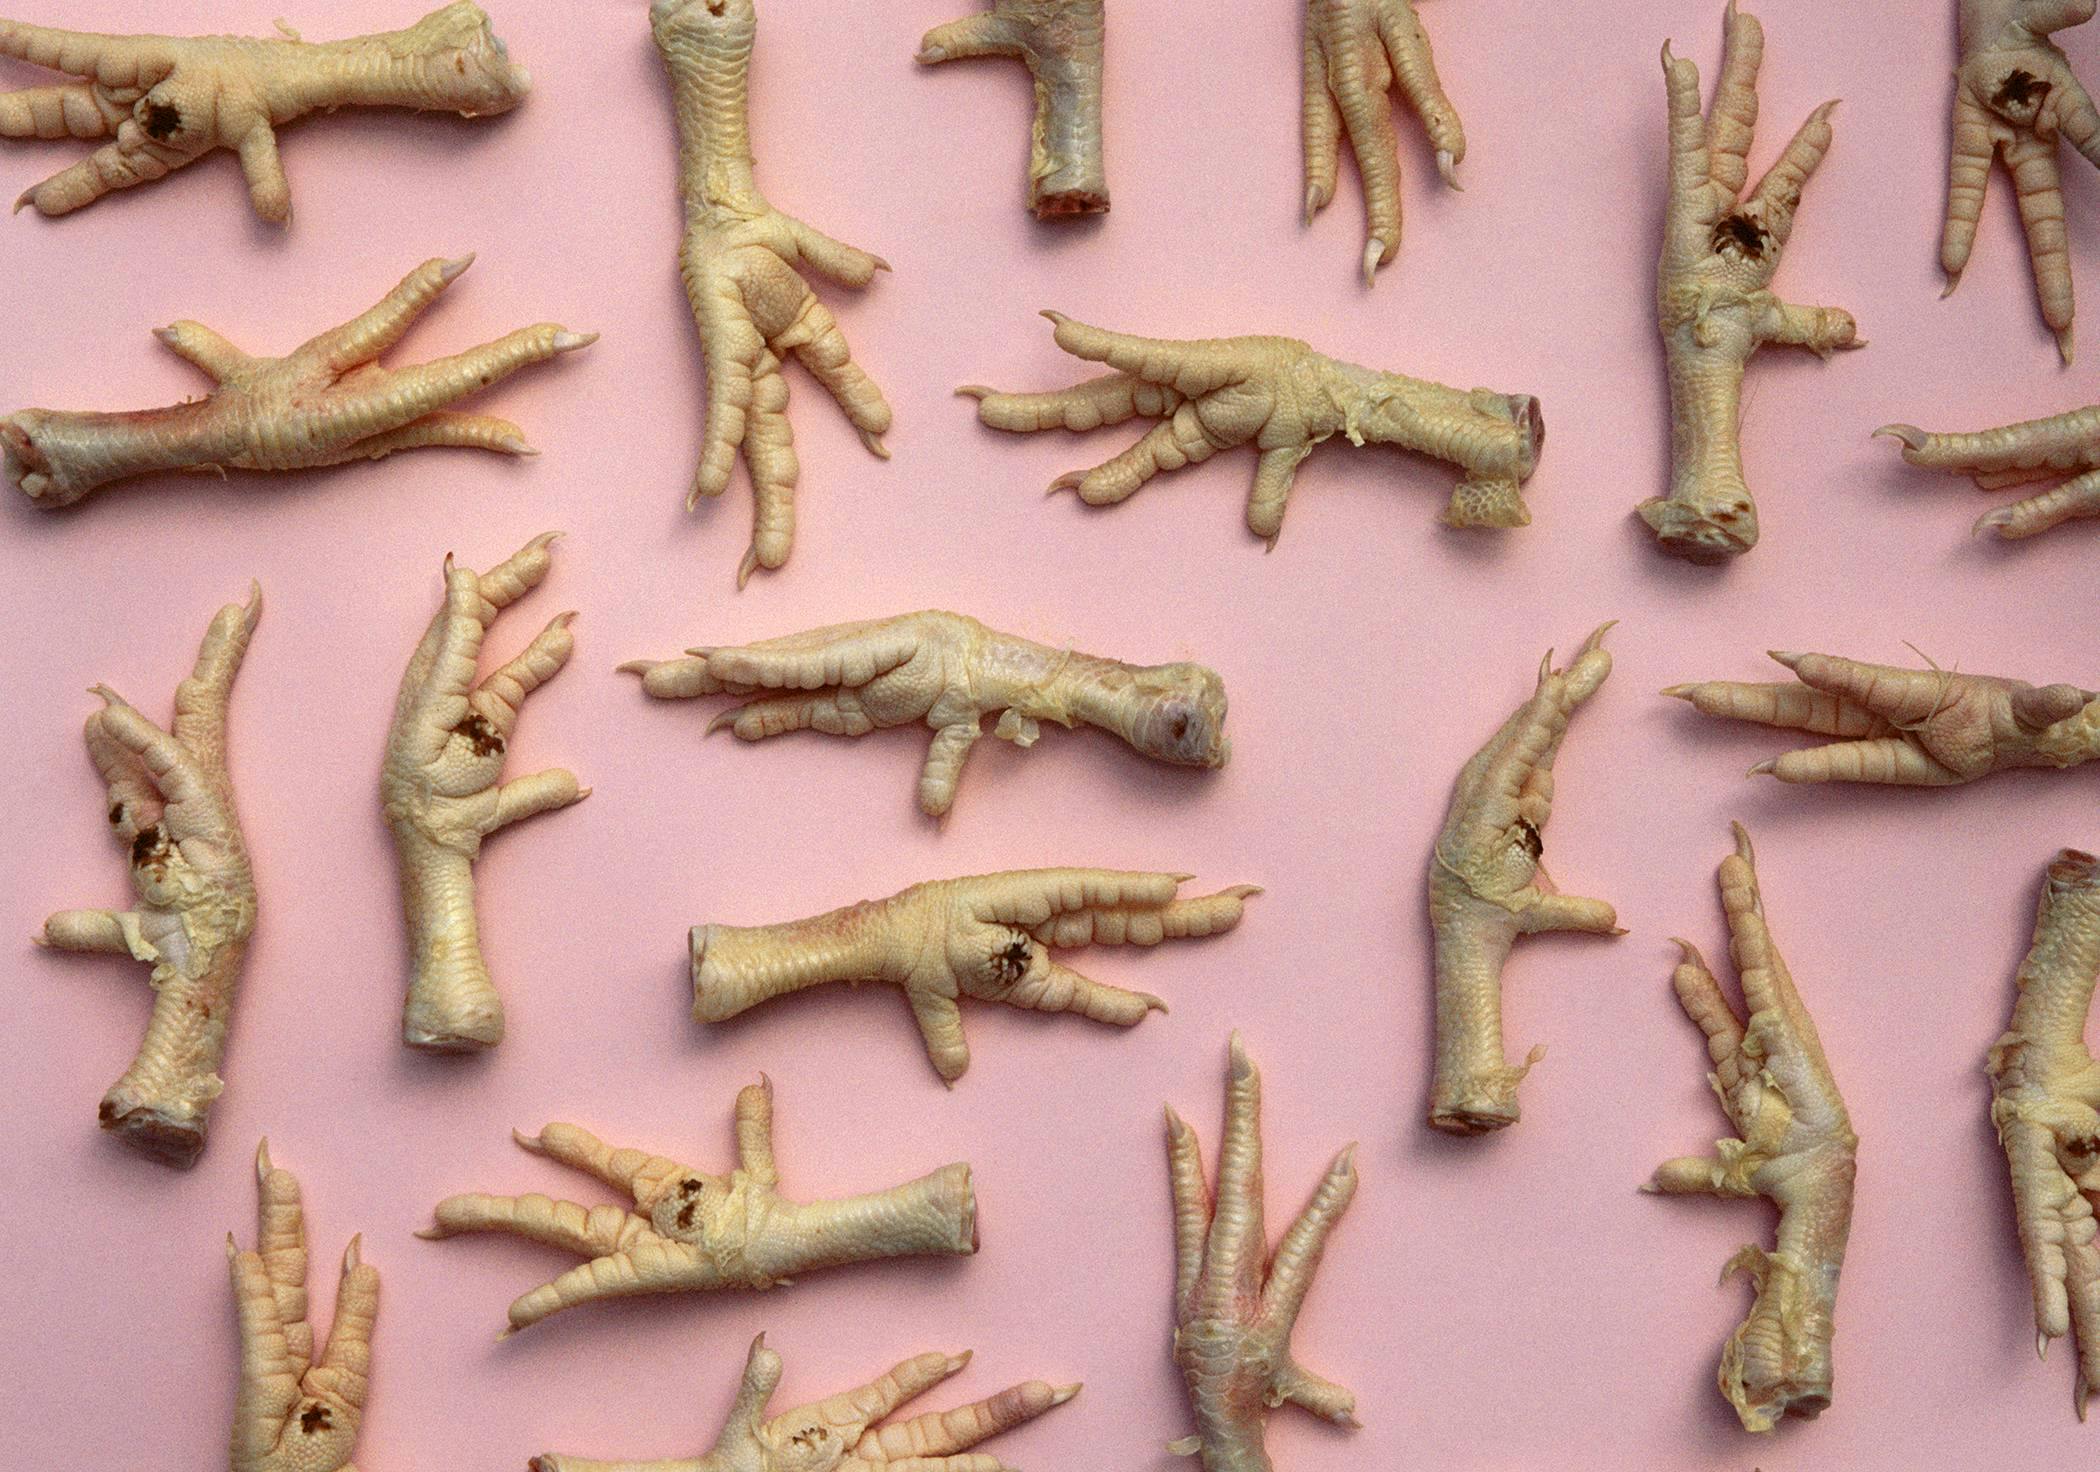 'Claws' by Natasha Cantwell, C-Type Photograph, Edition of 5